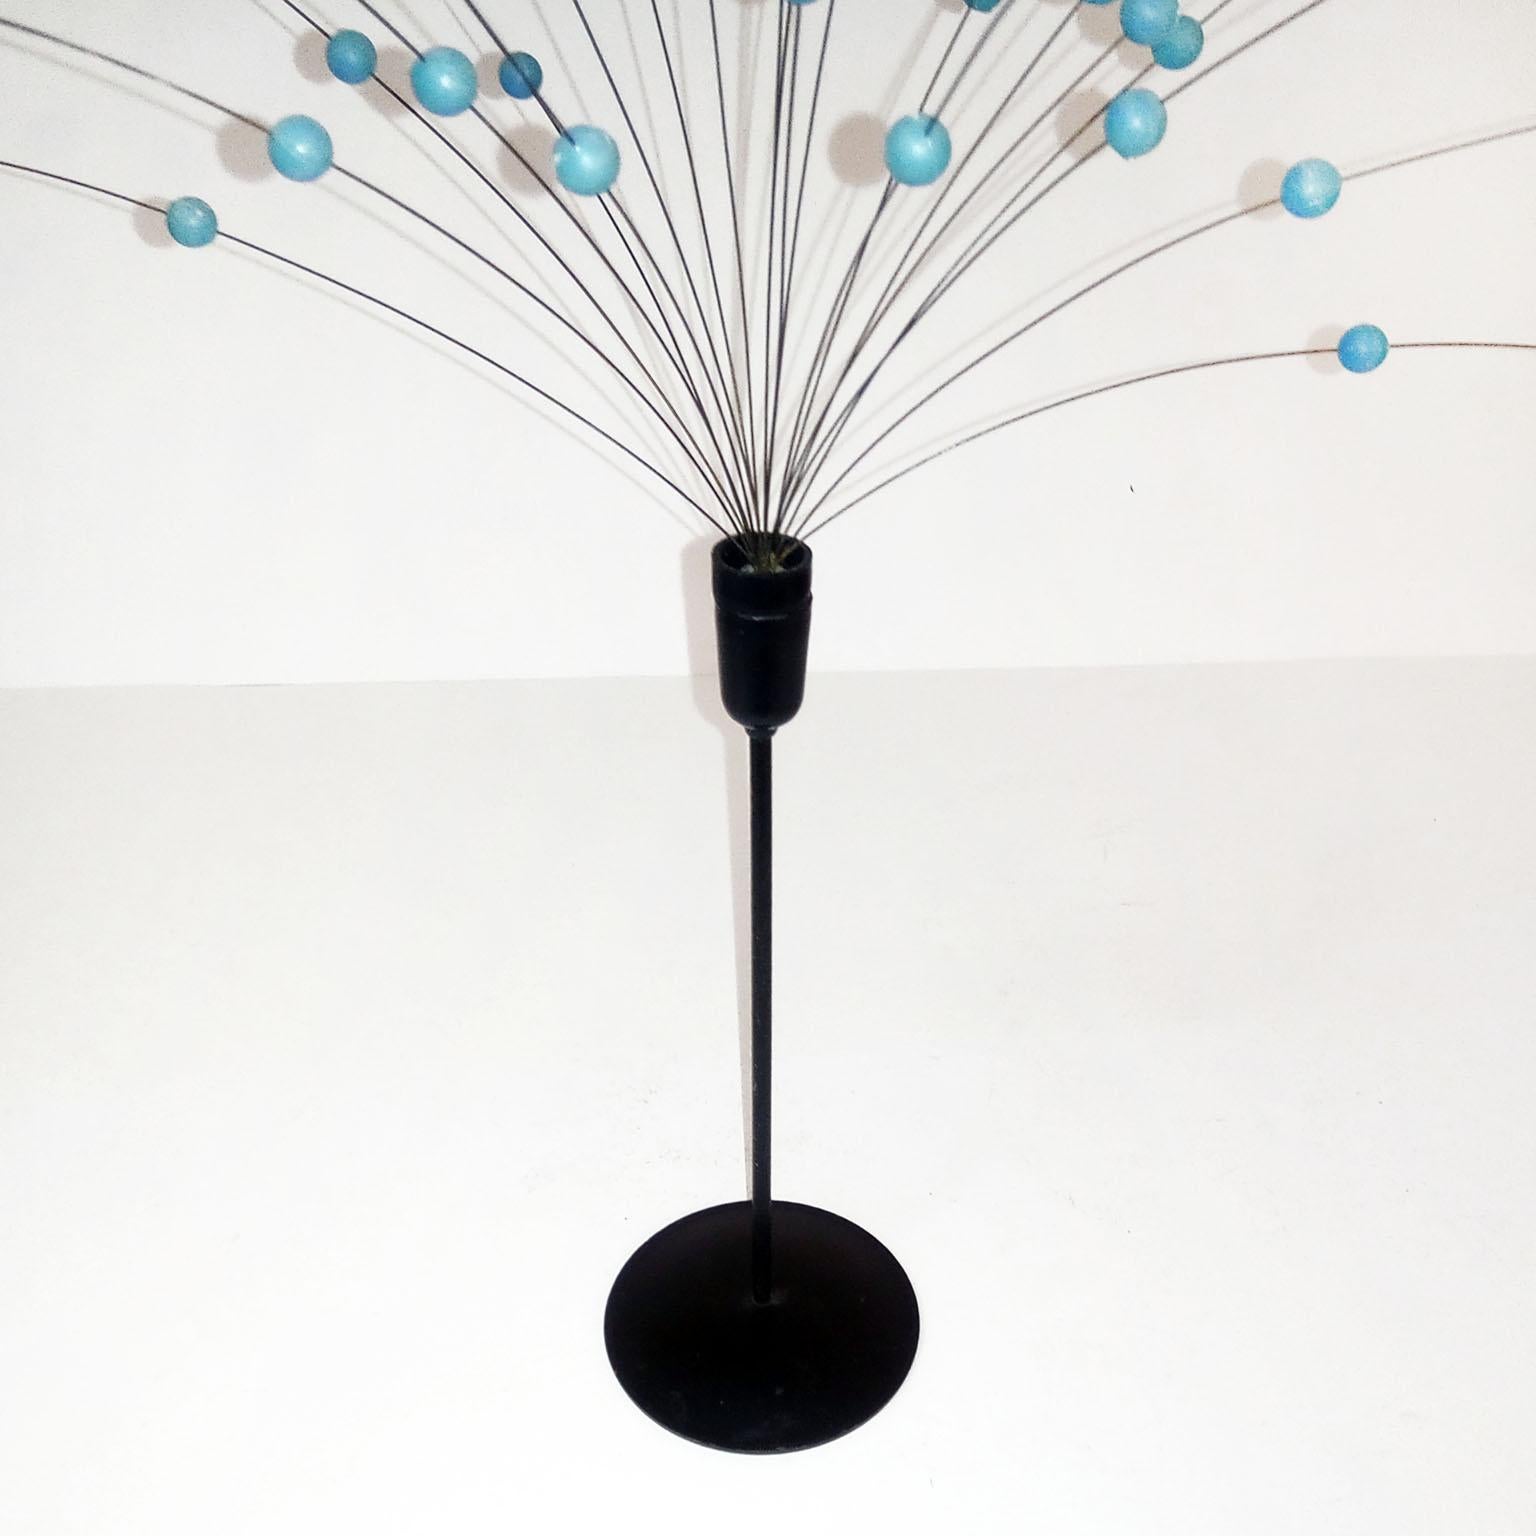 Space Age Laurids Lonborg for Scandia Design Blue Kinetic Ball Sculpture